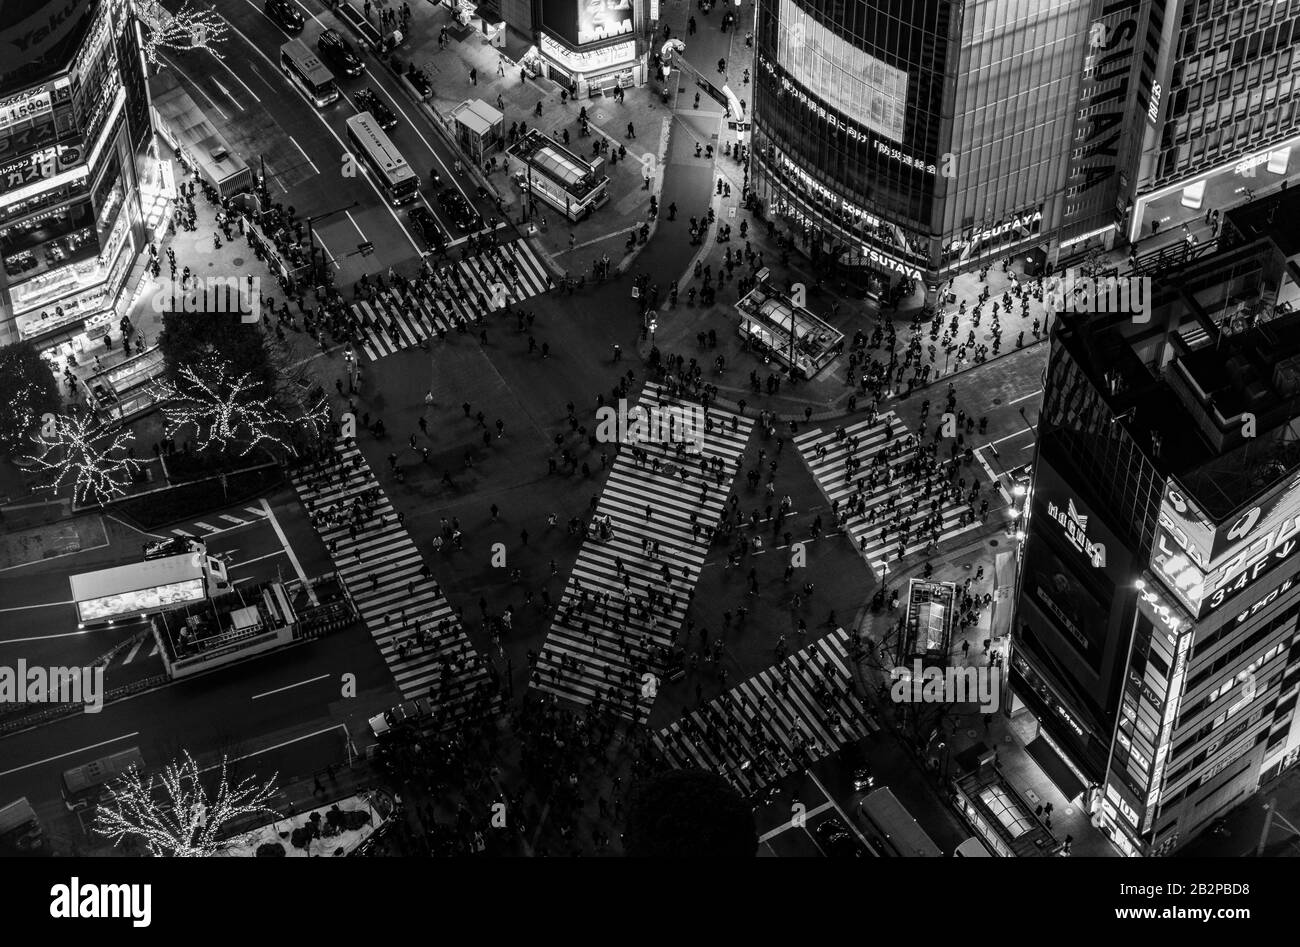 A black and white picture of the Shibuya Crossing, as seen from above, at night. Stock Photo